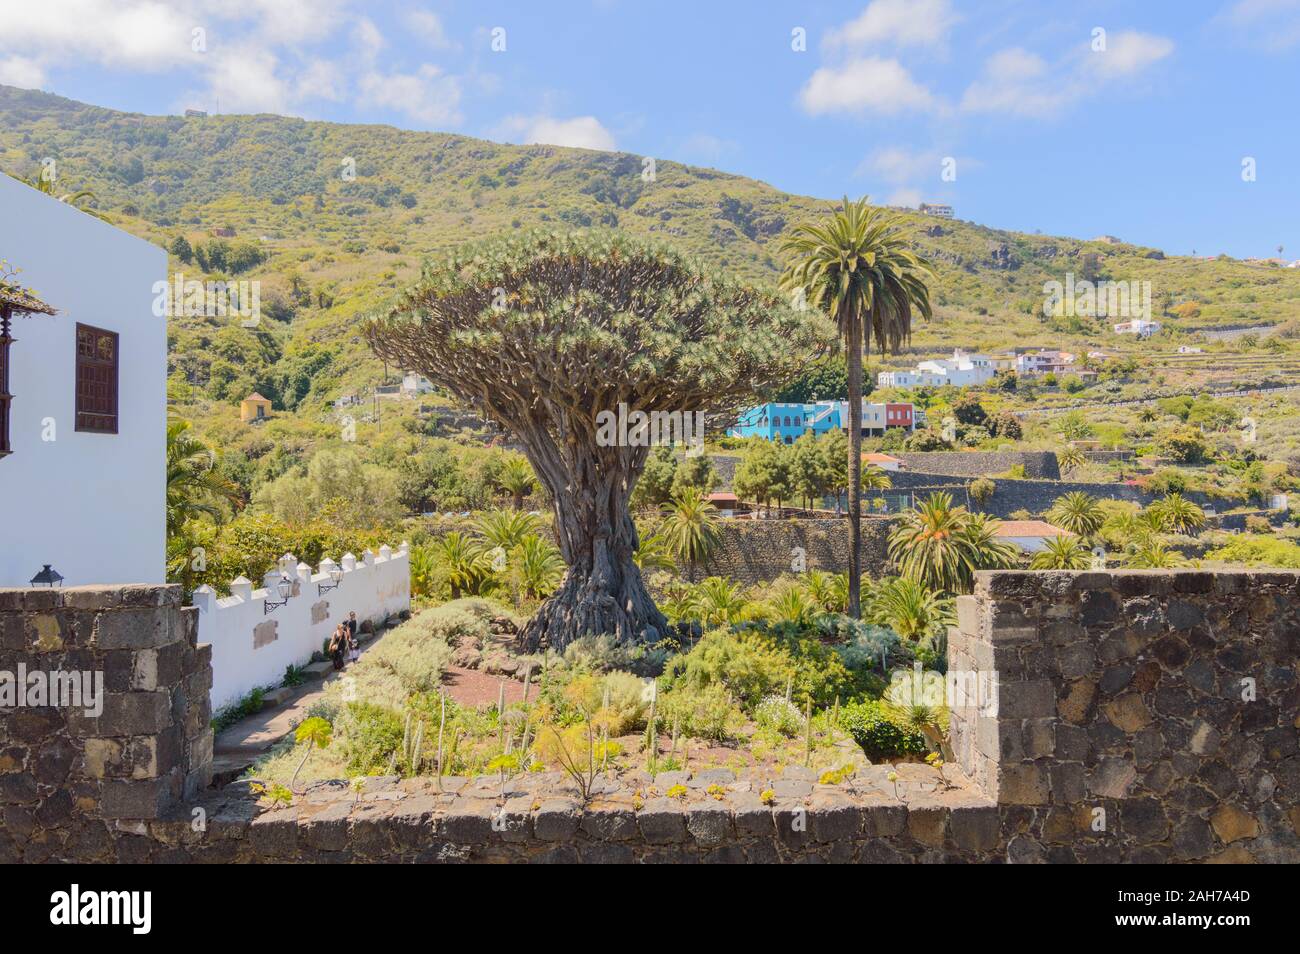 Millennial Drago Tree Next To A Palm Tree Symbol Of The Village Of Icod De Los Vinos Seen From The Balcony Of The Church. April 14, 2019. Icod De Los Stock Photo